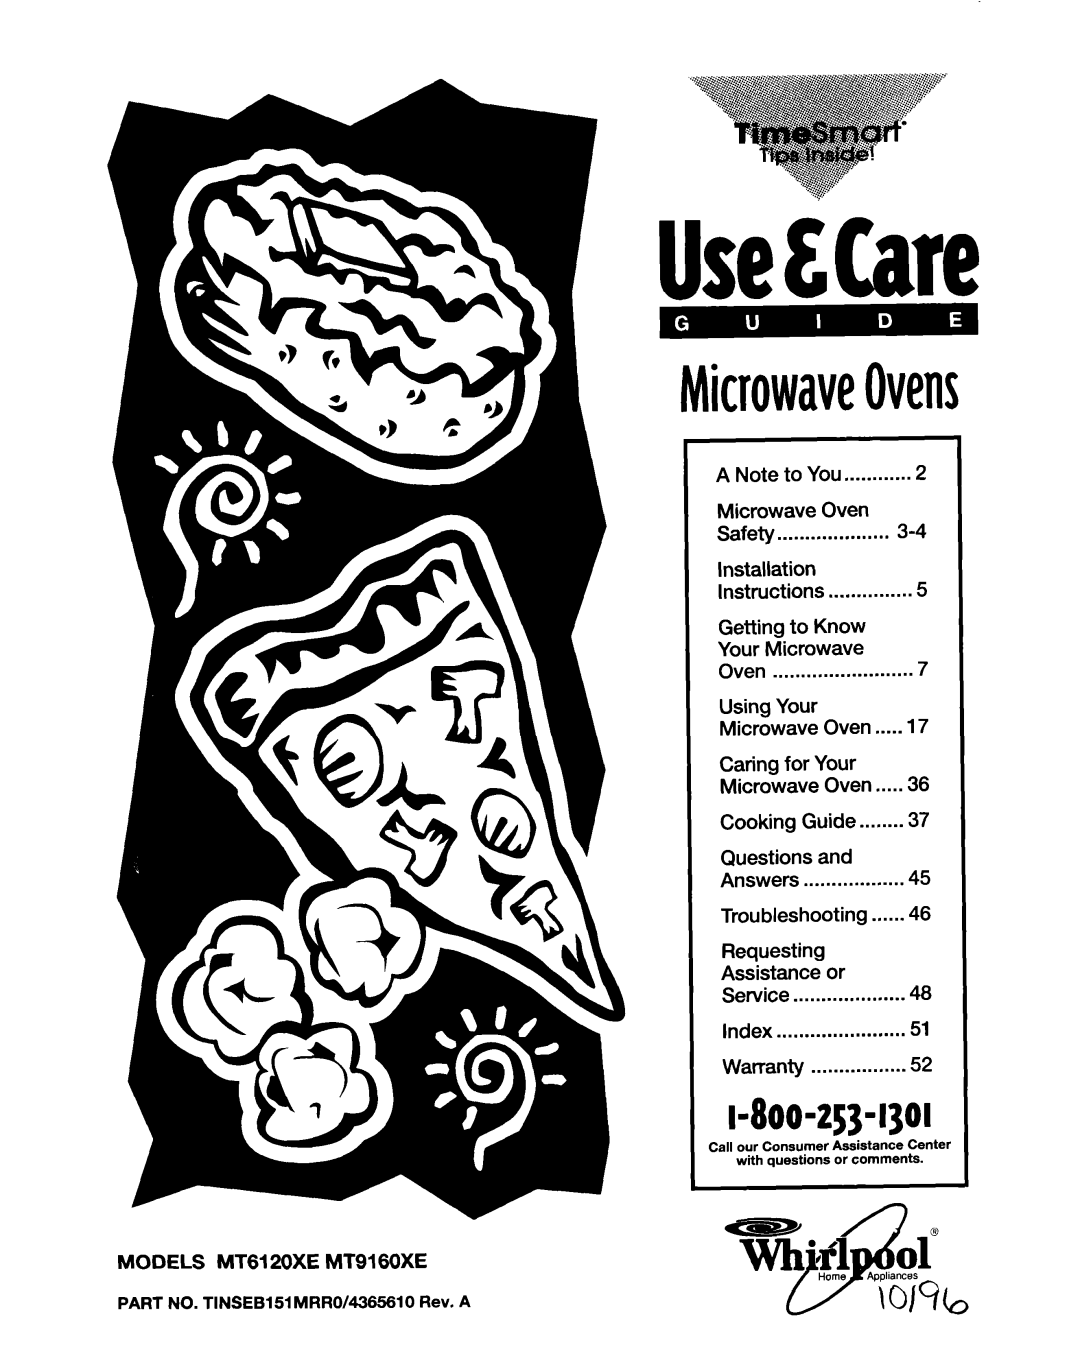 Whirlpool MT6120XE, MT9160XE installation instructions 1-800-253-1301, MicrowaveOven 